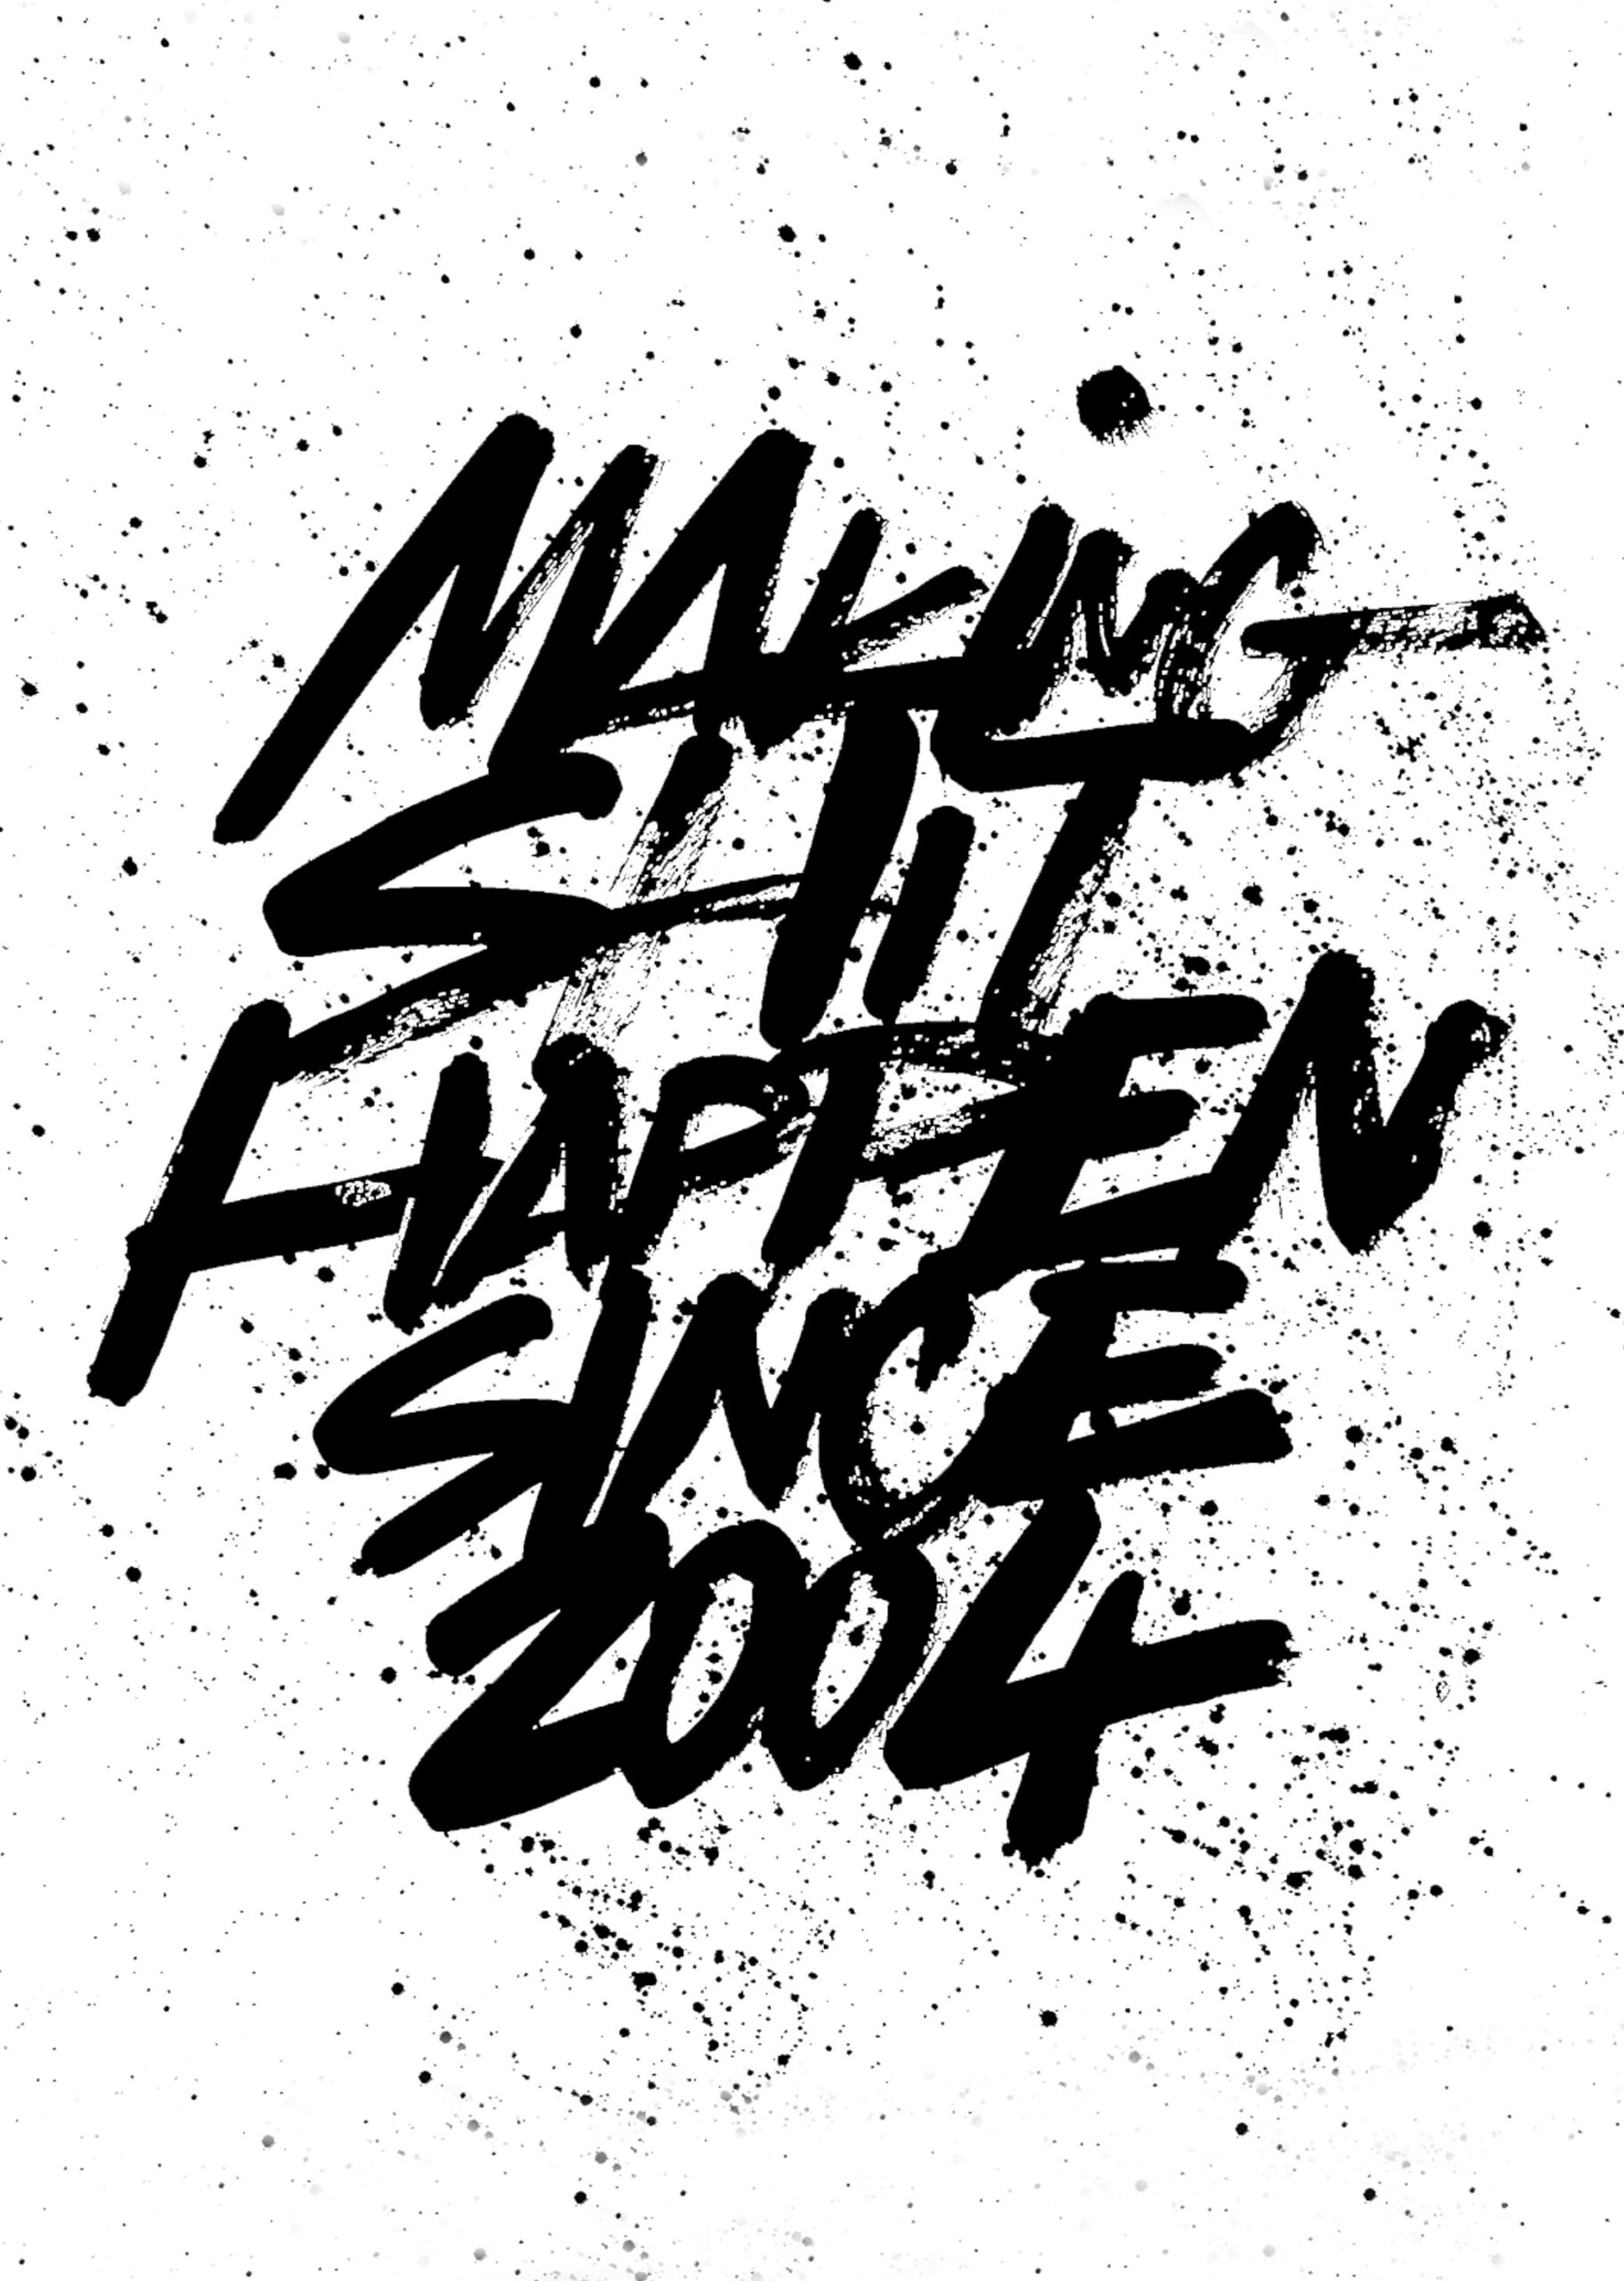 Hand drawn typographical design created by artist Rob Draper using the phrase 